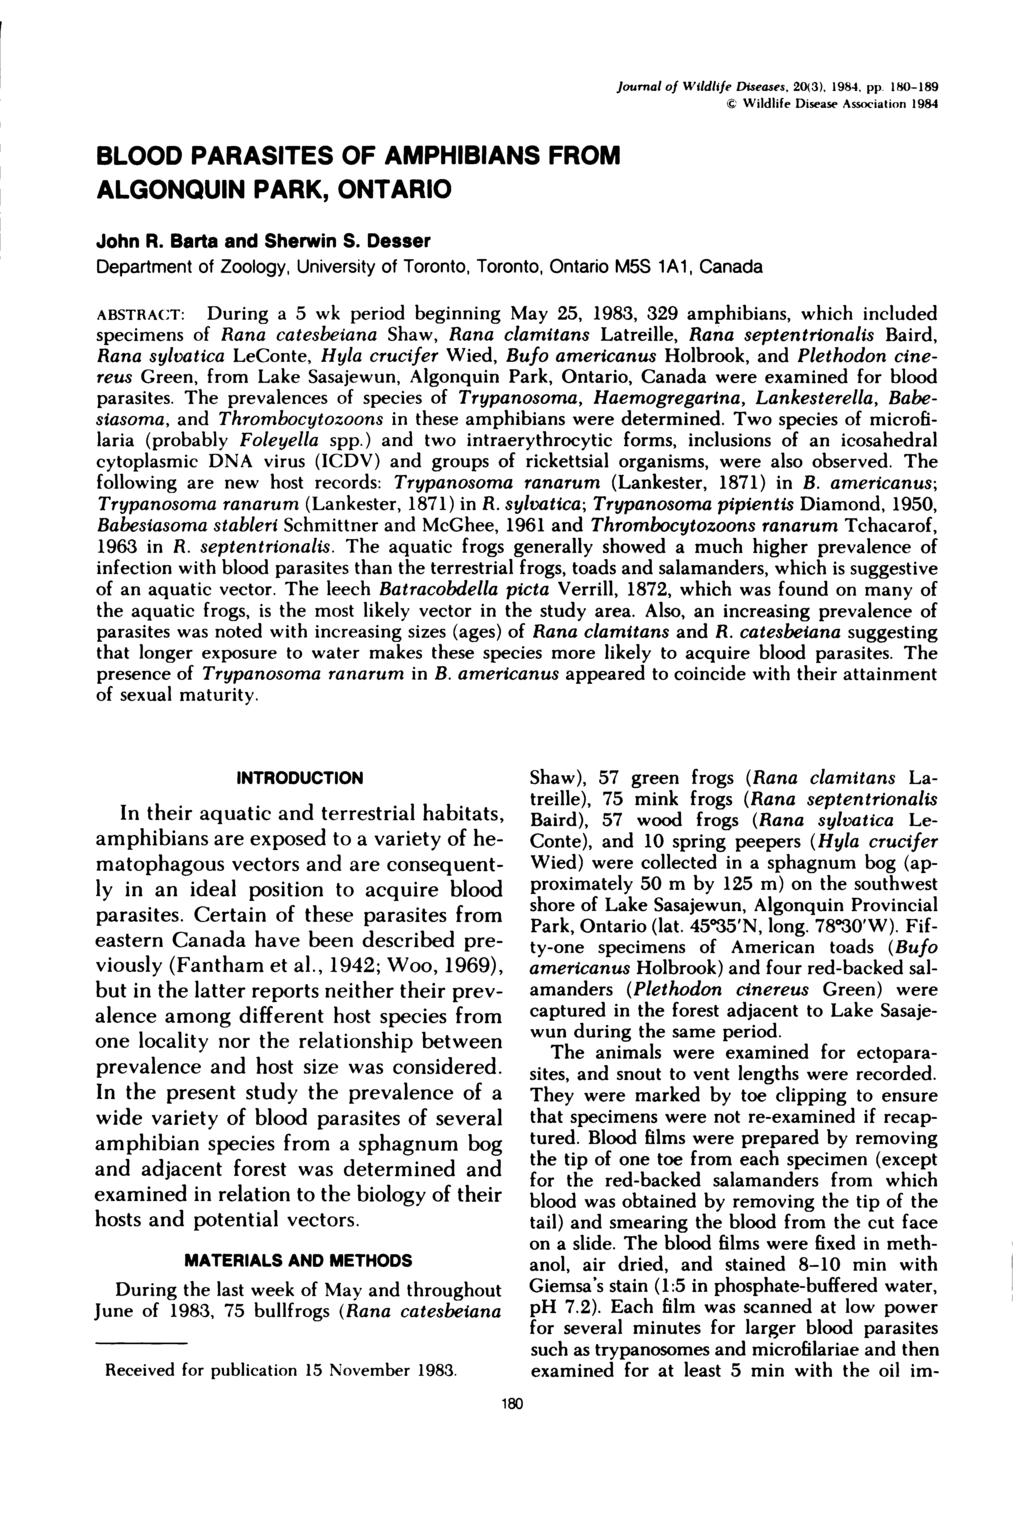 Journal of Wildlife Diseases, 20(3), 1984, pp. 180-189 Wildlife Disease Association 1984 BLOOD PARASITES OF AMPHIBIANS FROM ALGONQUIN PARK, ONTARIO John R. Barta and Sherwin S.